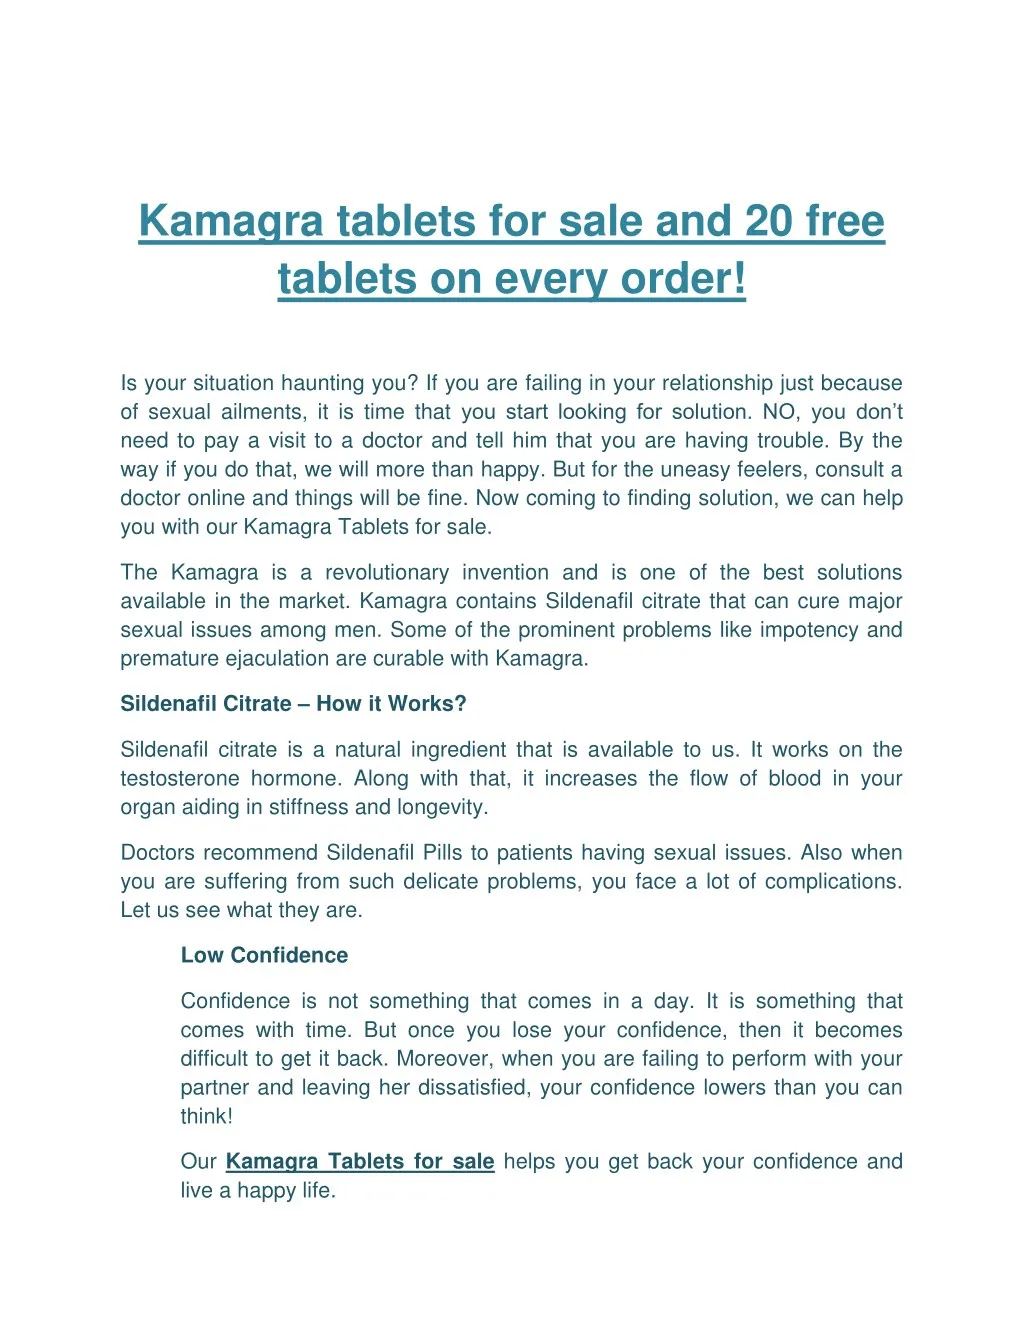 kamagra tablets for sale and 20 free tablets